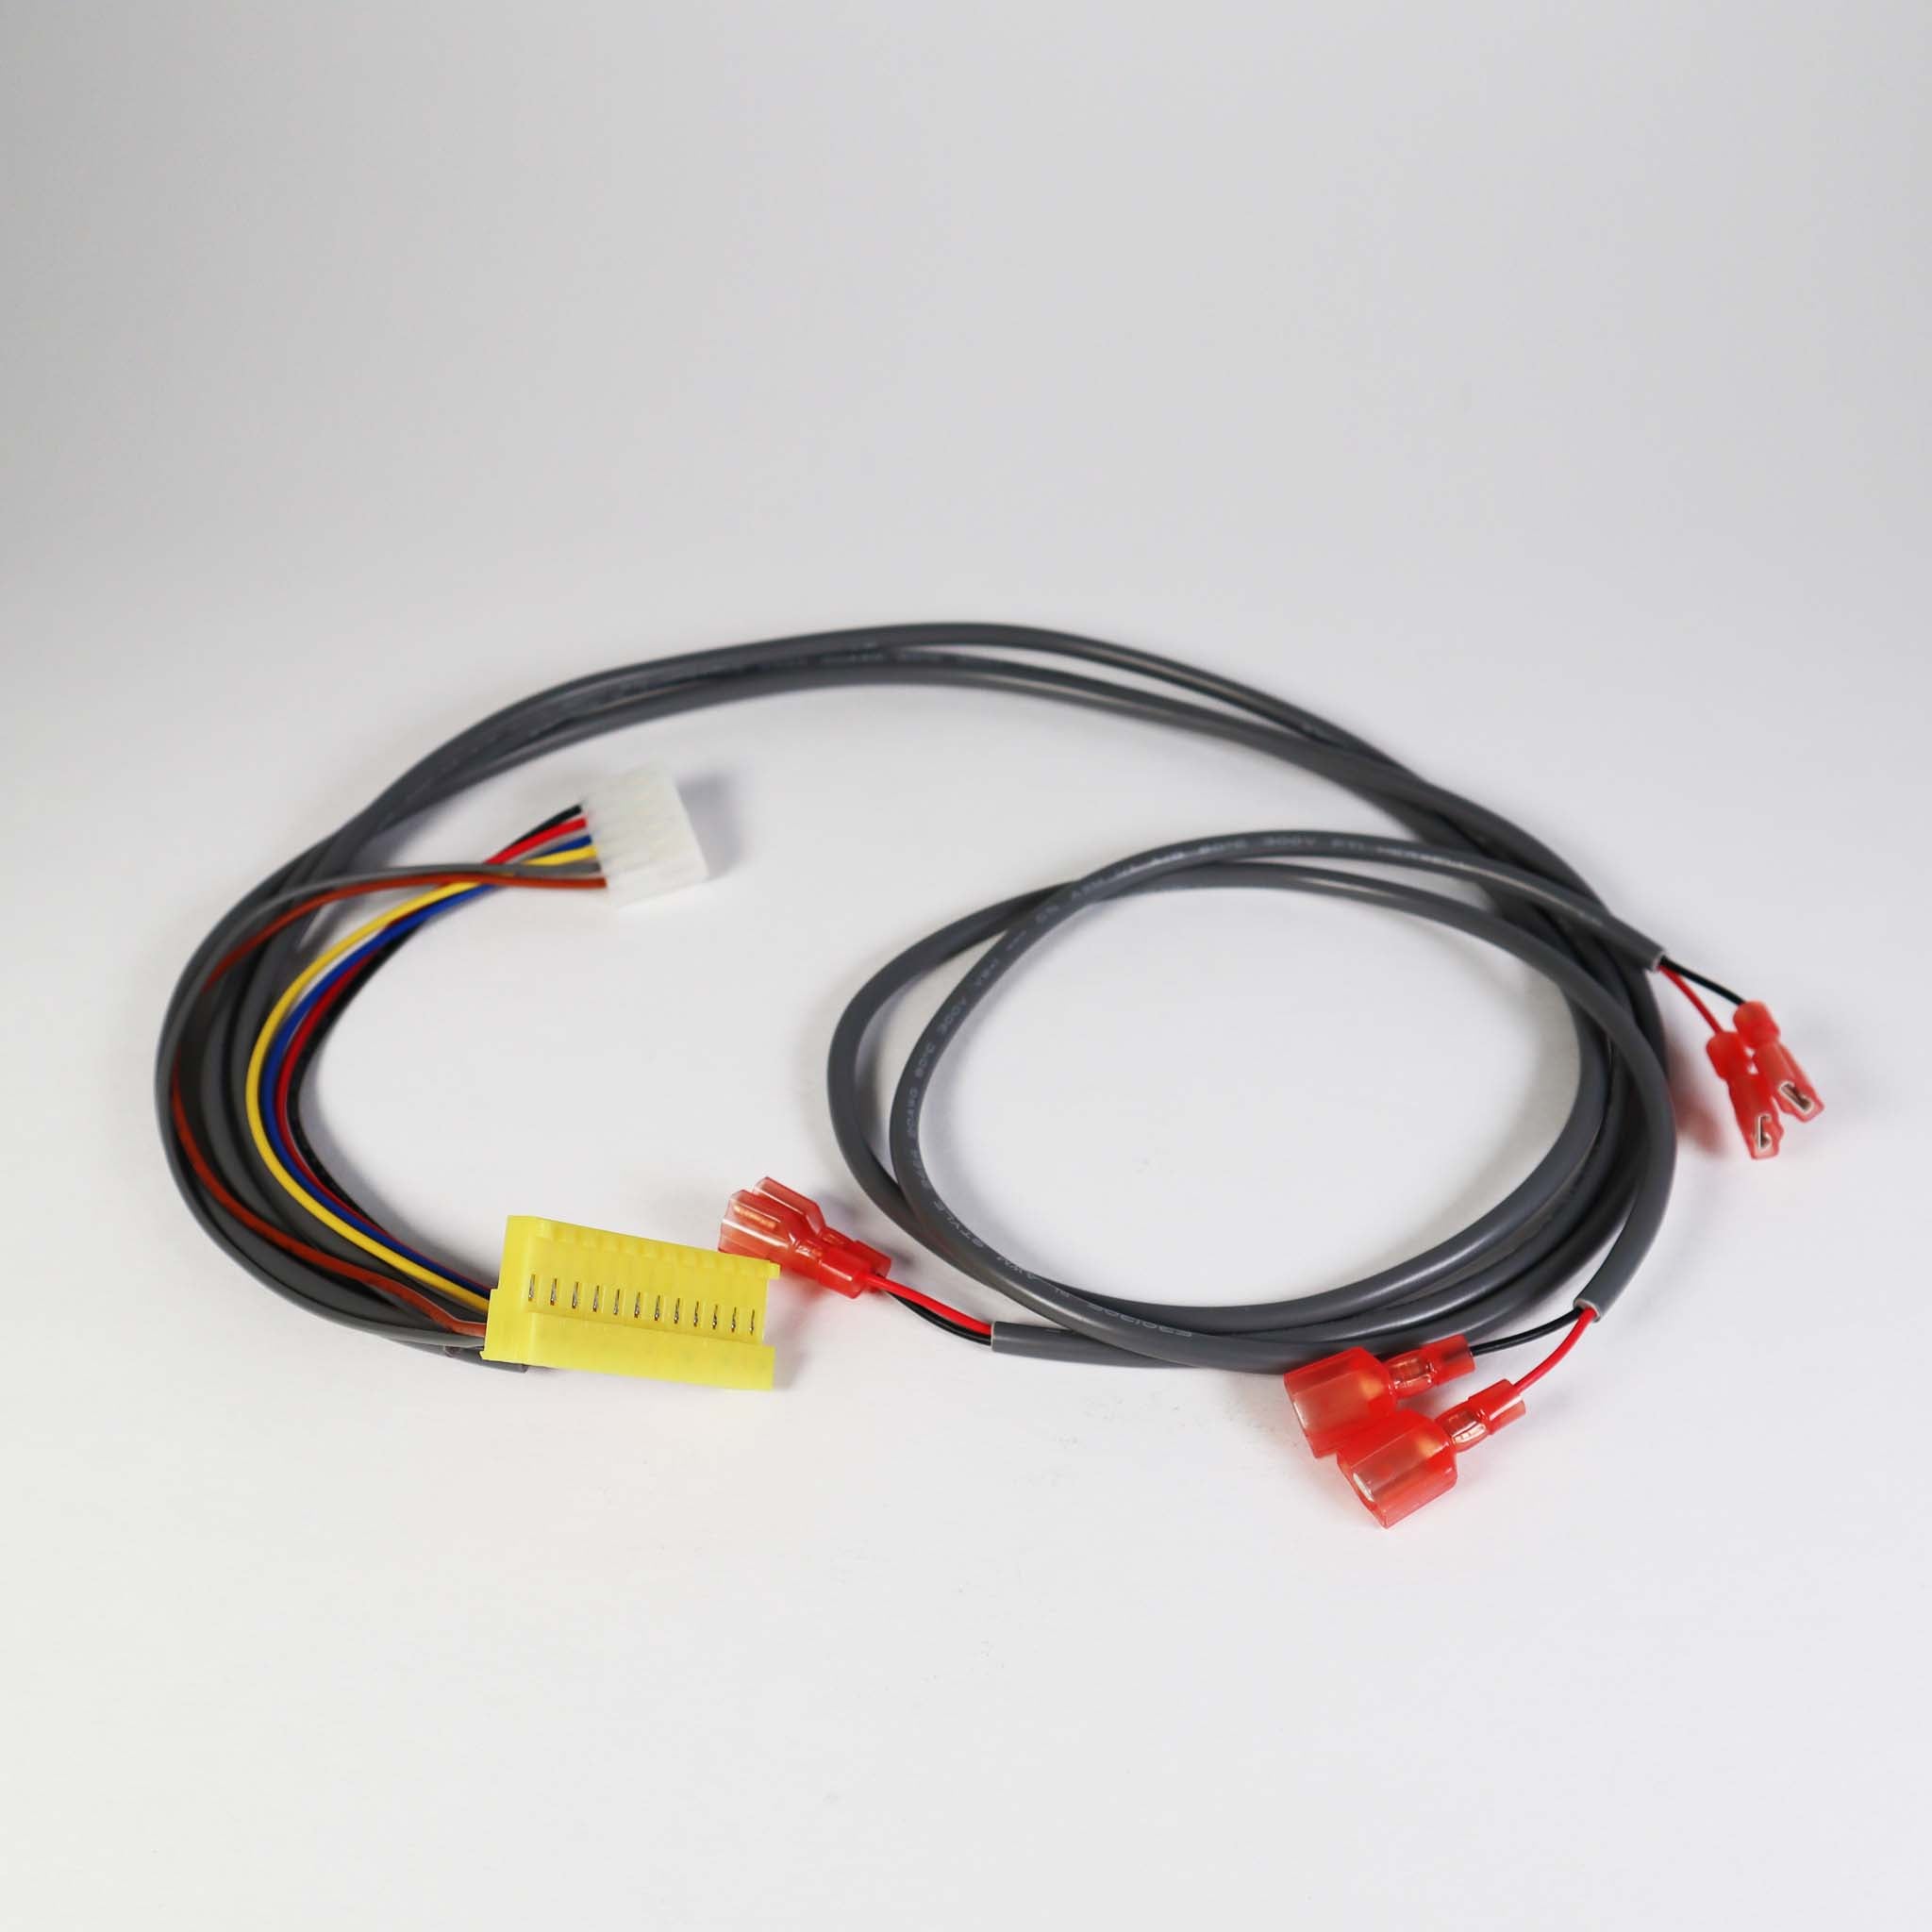 Hysecurity MX000033 PSB to STC Wiring Harness